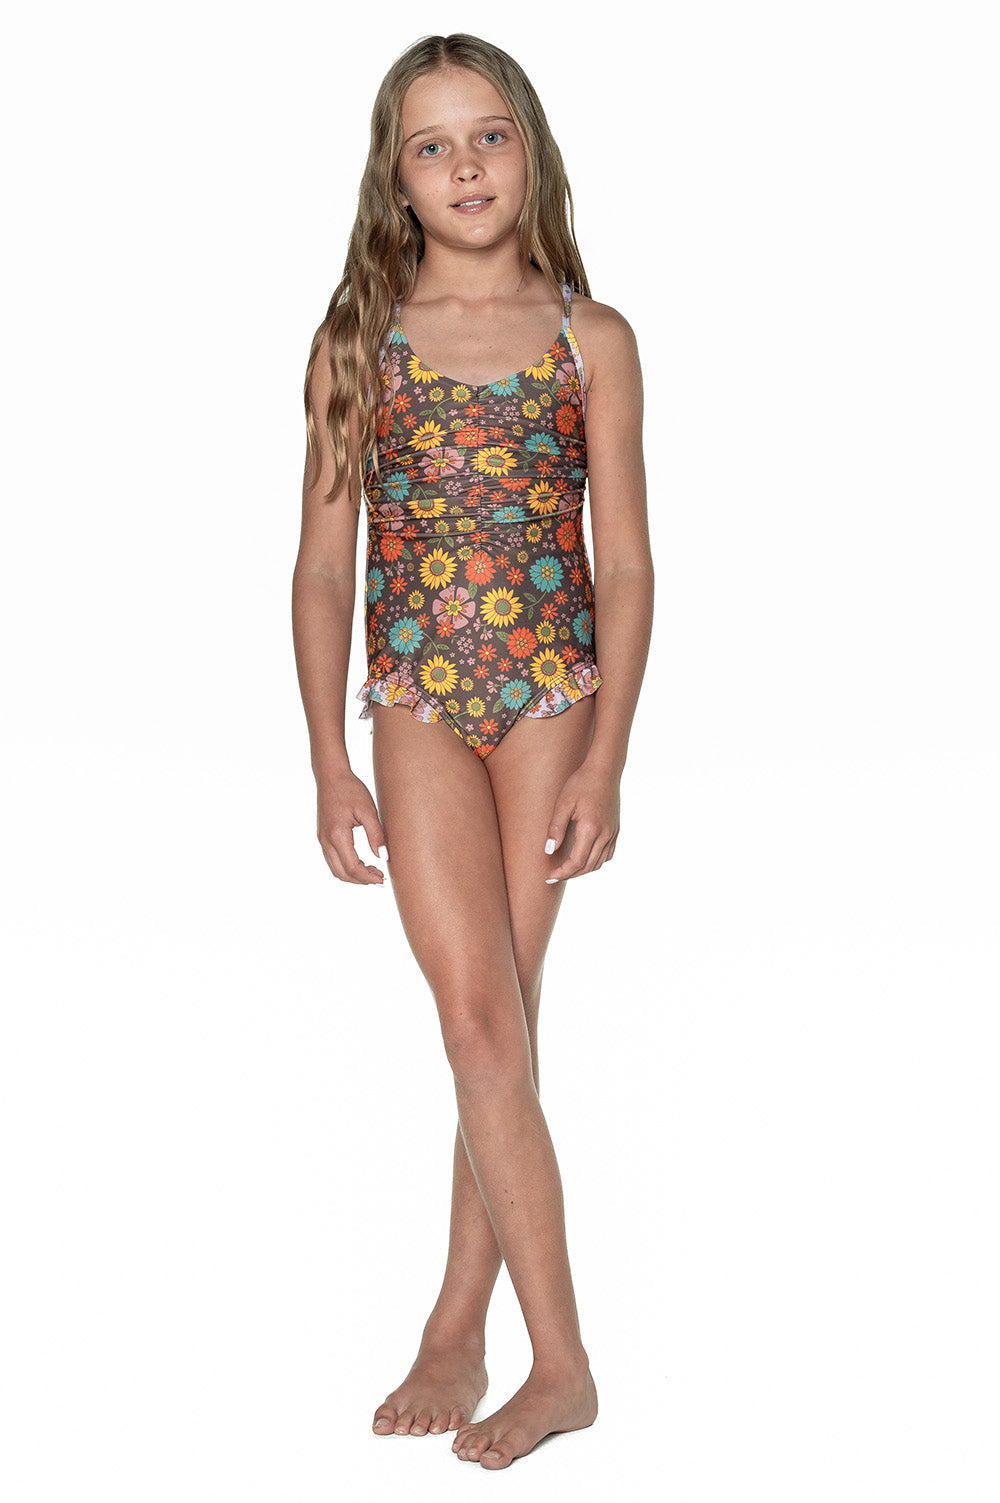 Girls One Piece Cross Back Swimsuit - Brown Floral - Poppy - Front